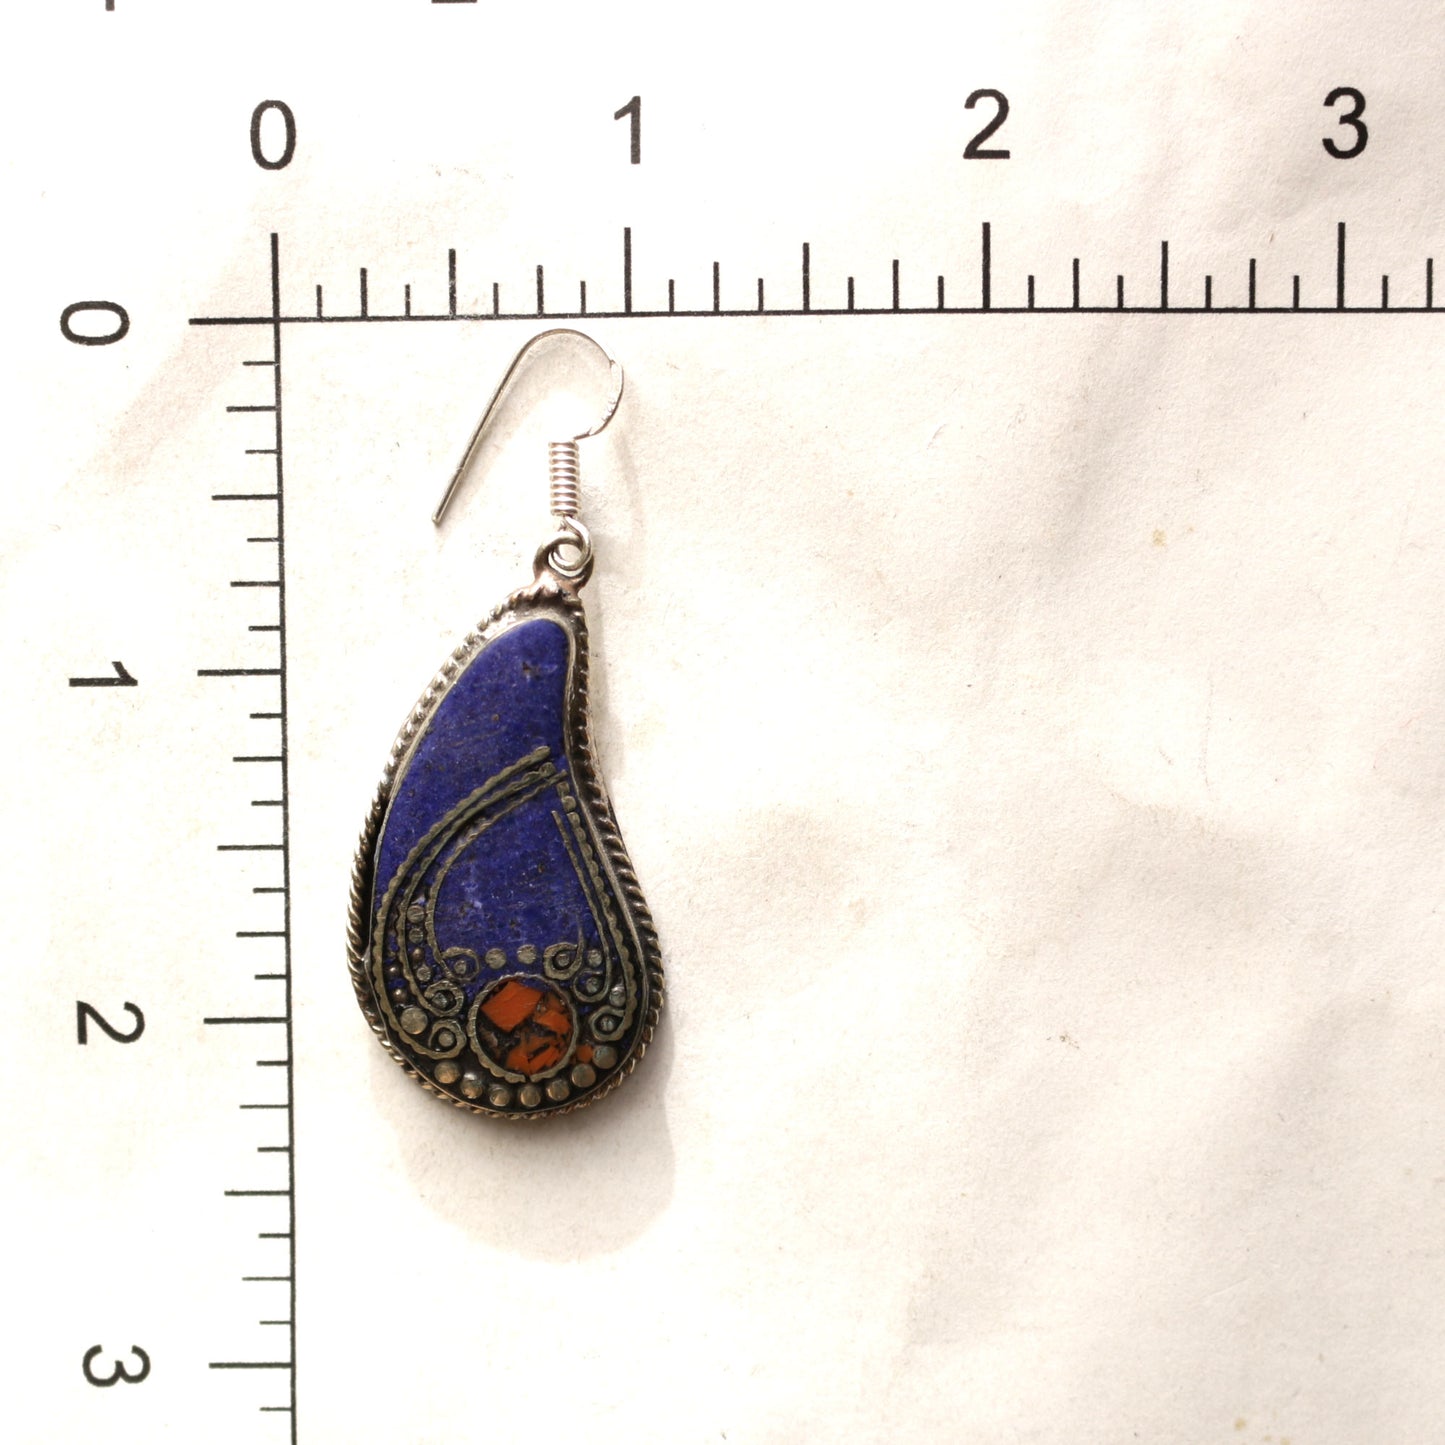 Lapis & Coral Inlay Earrings